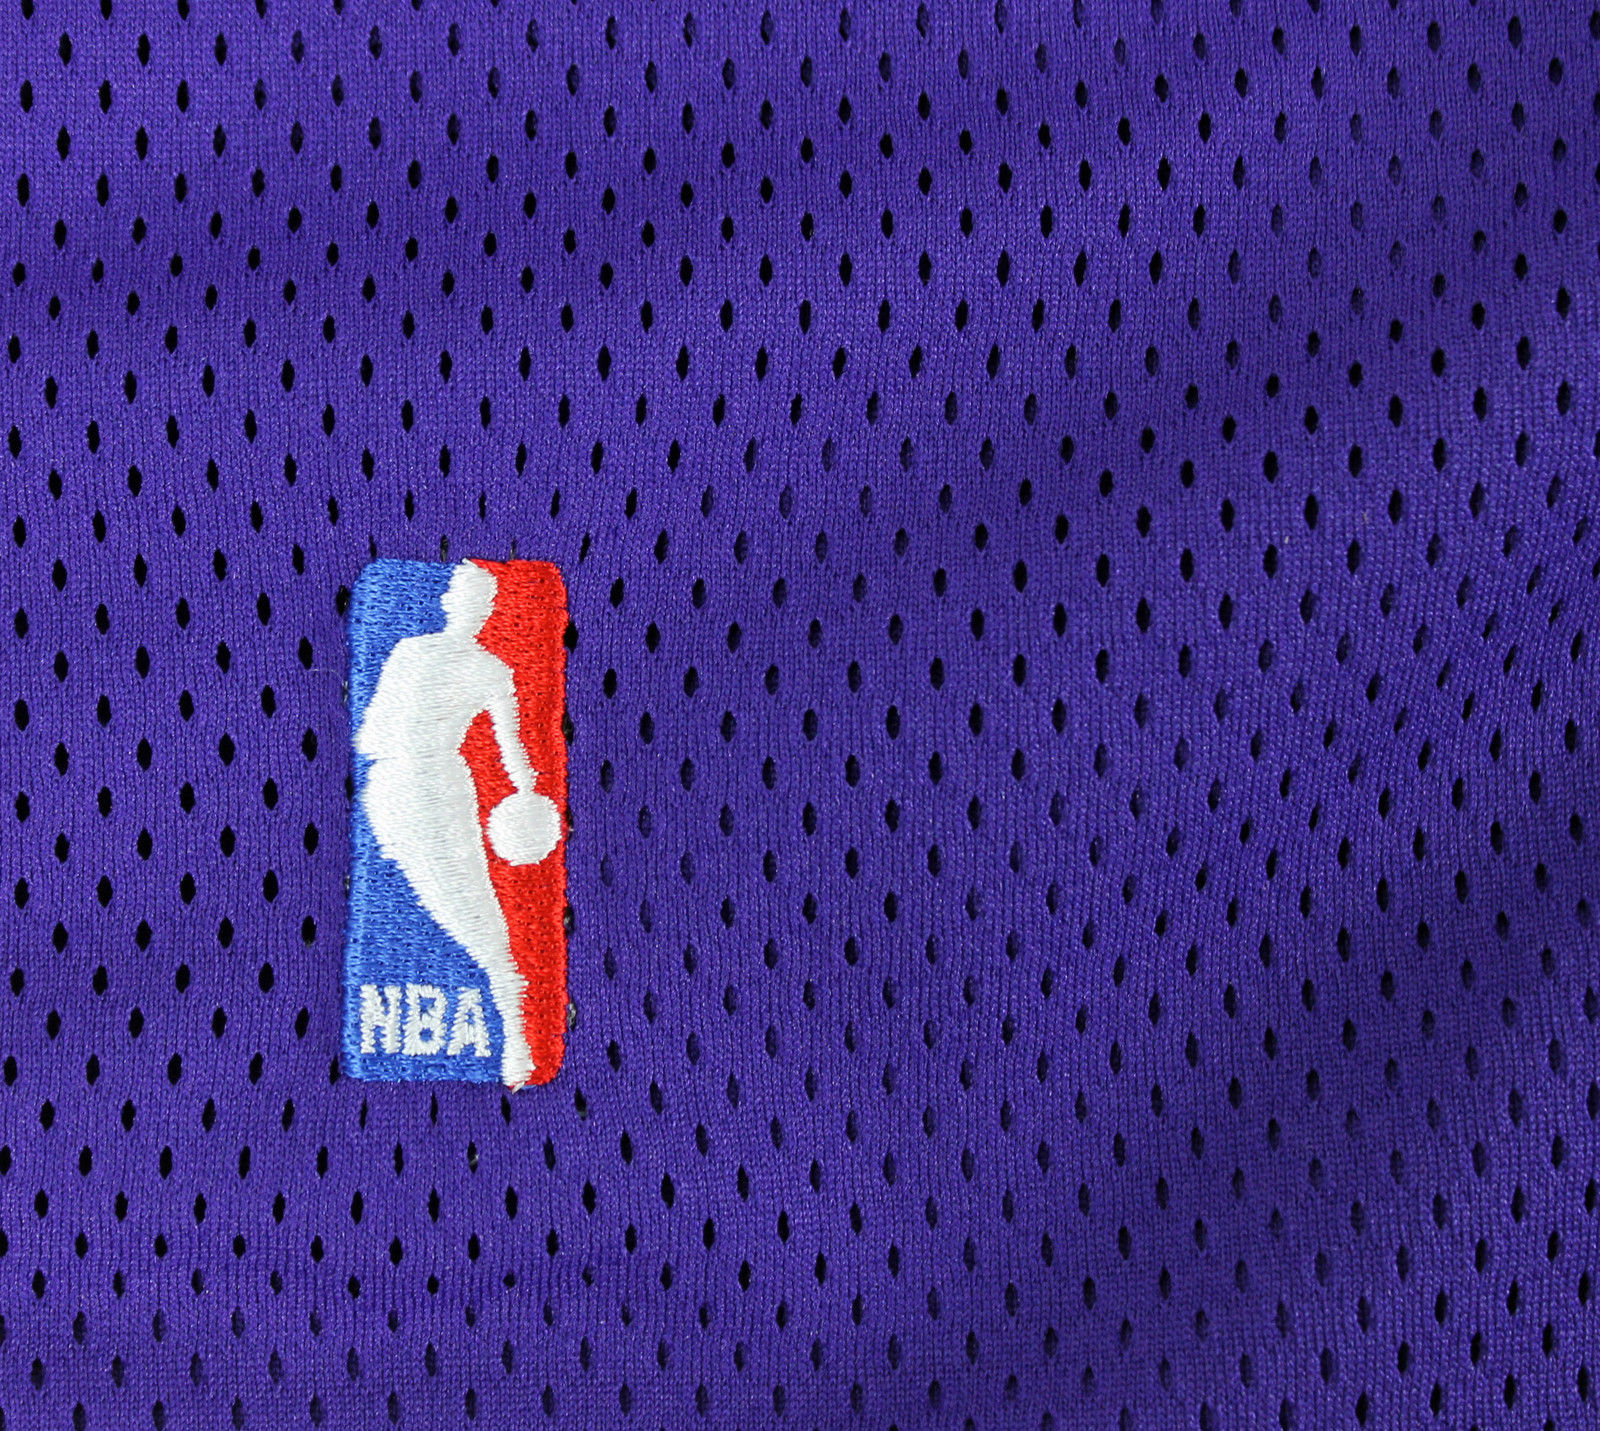 Lot Detail - 1997-98 Shaquille O'Neal Game Used Los Angeles Lakers Home  Jersey